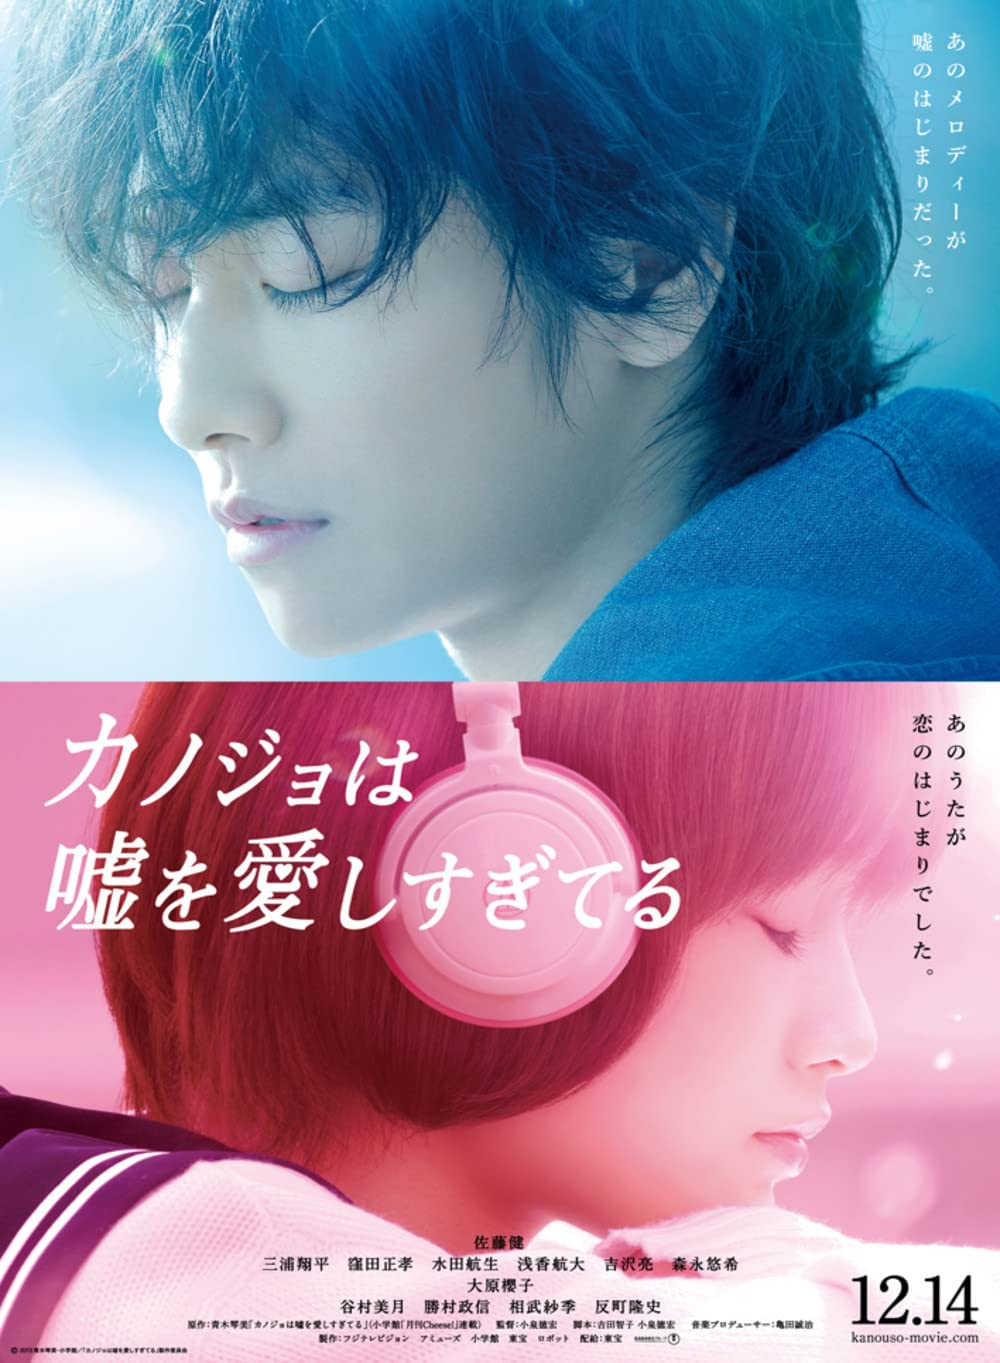 Japanese romance movies - The Liar and His Lover movie poster